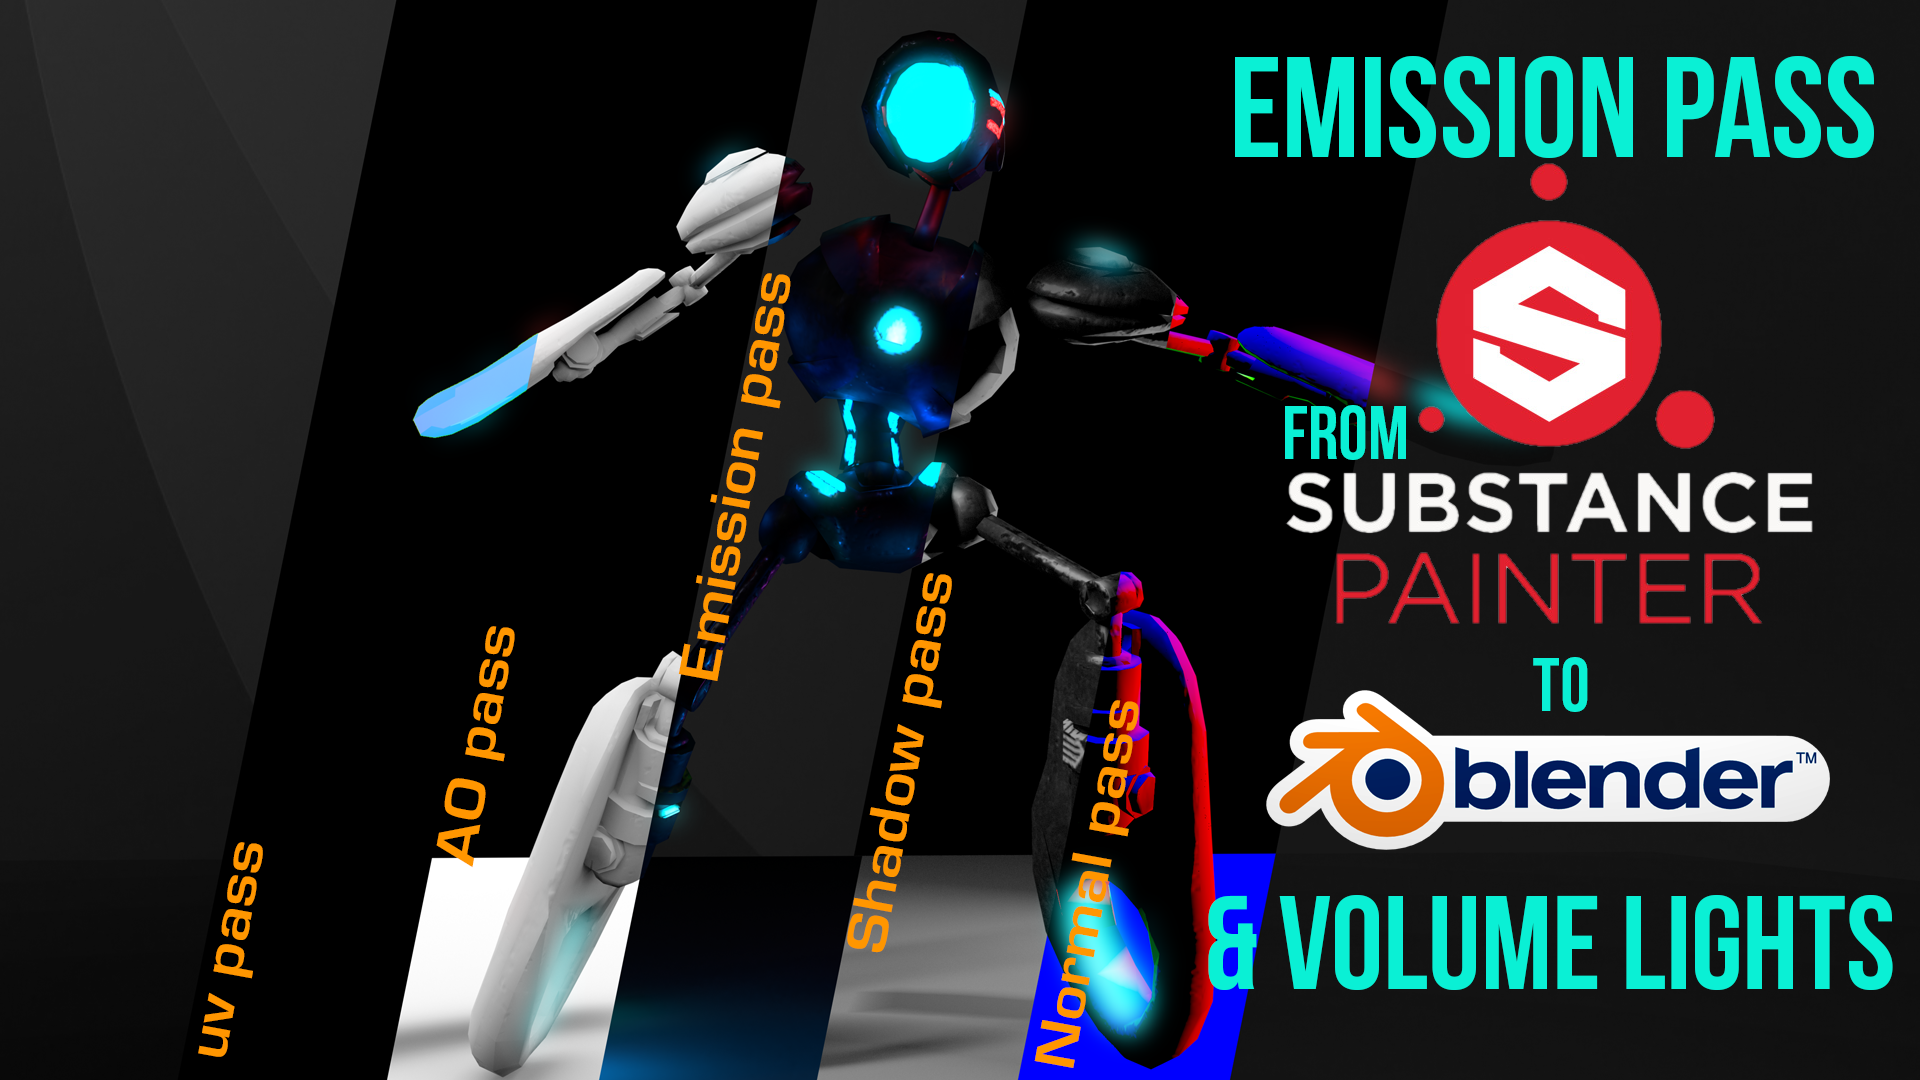 Create emission from substance painter to blender